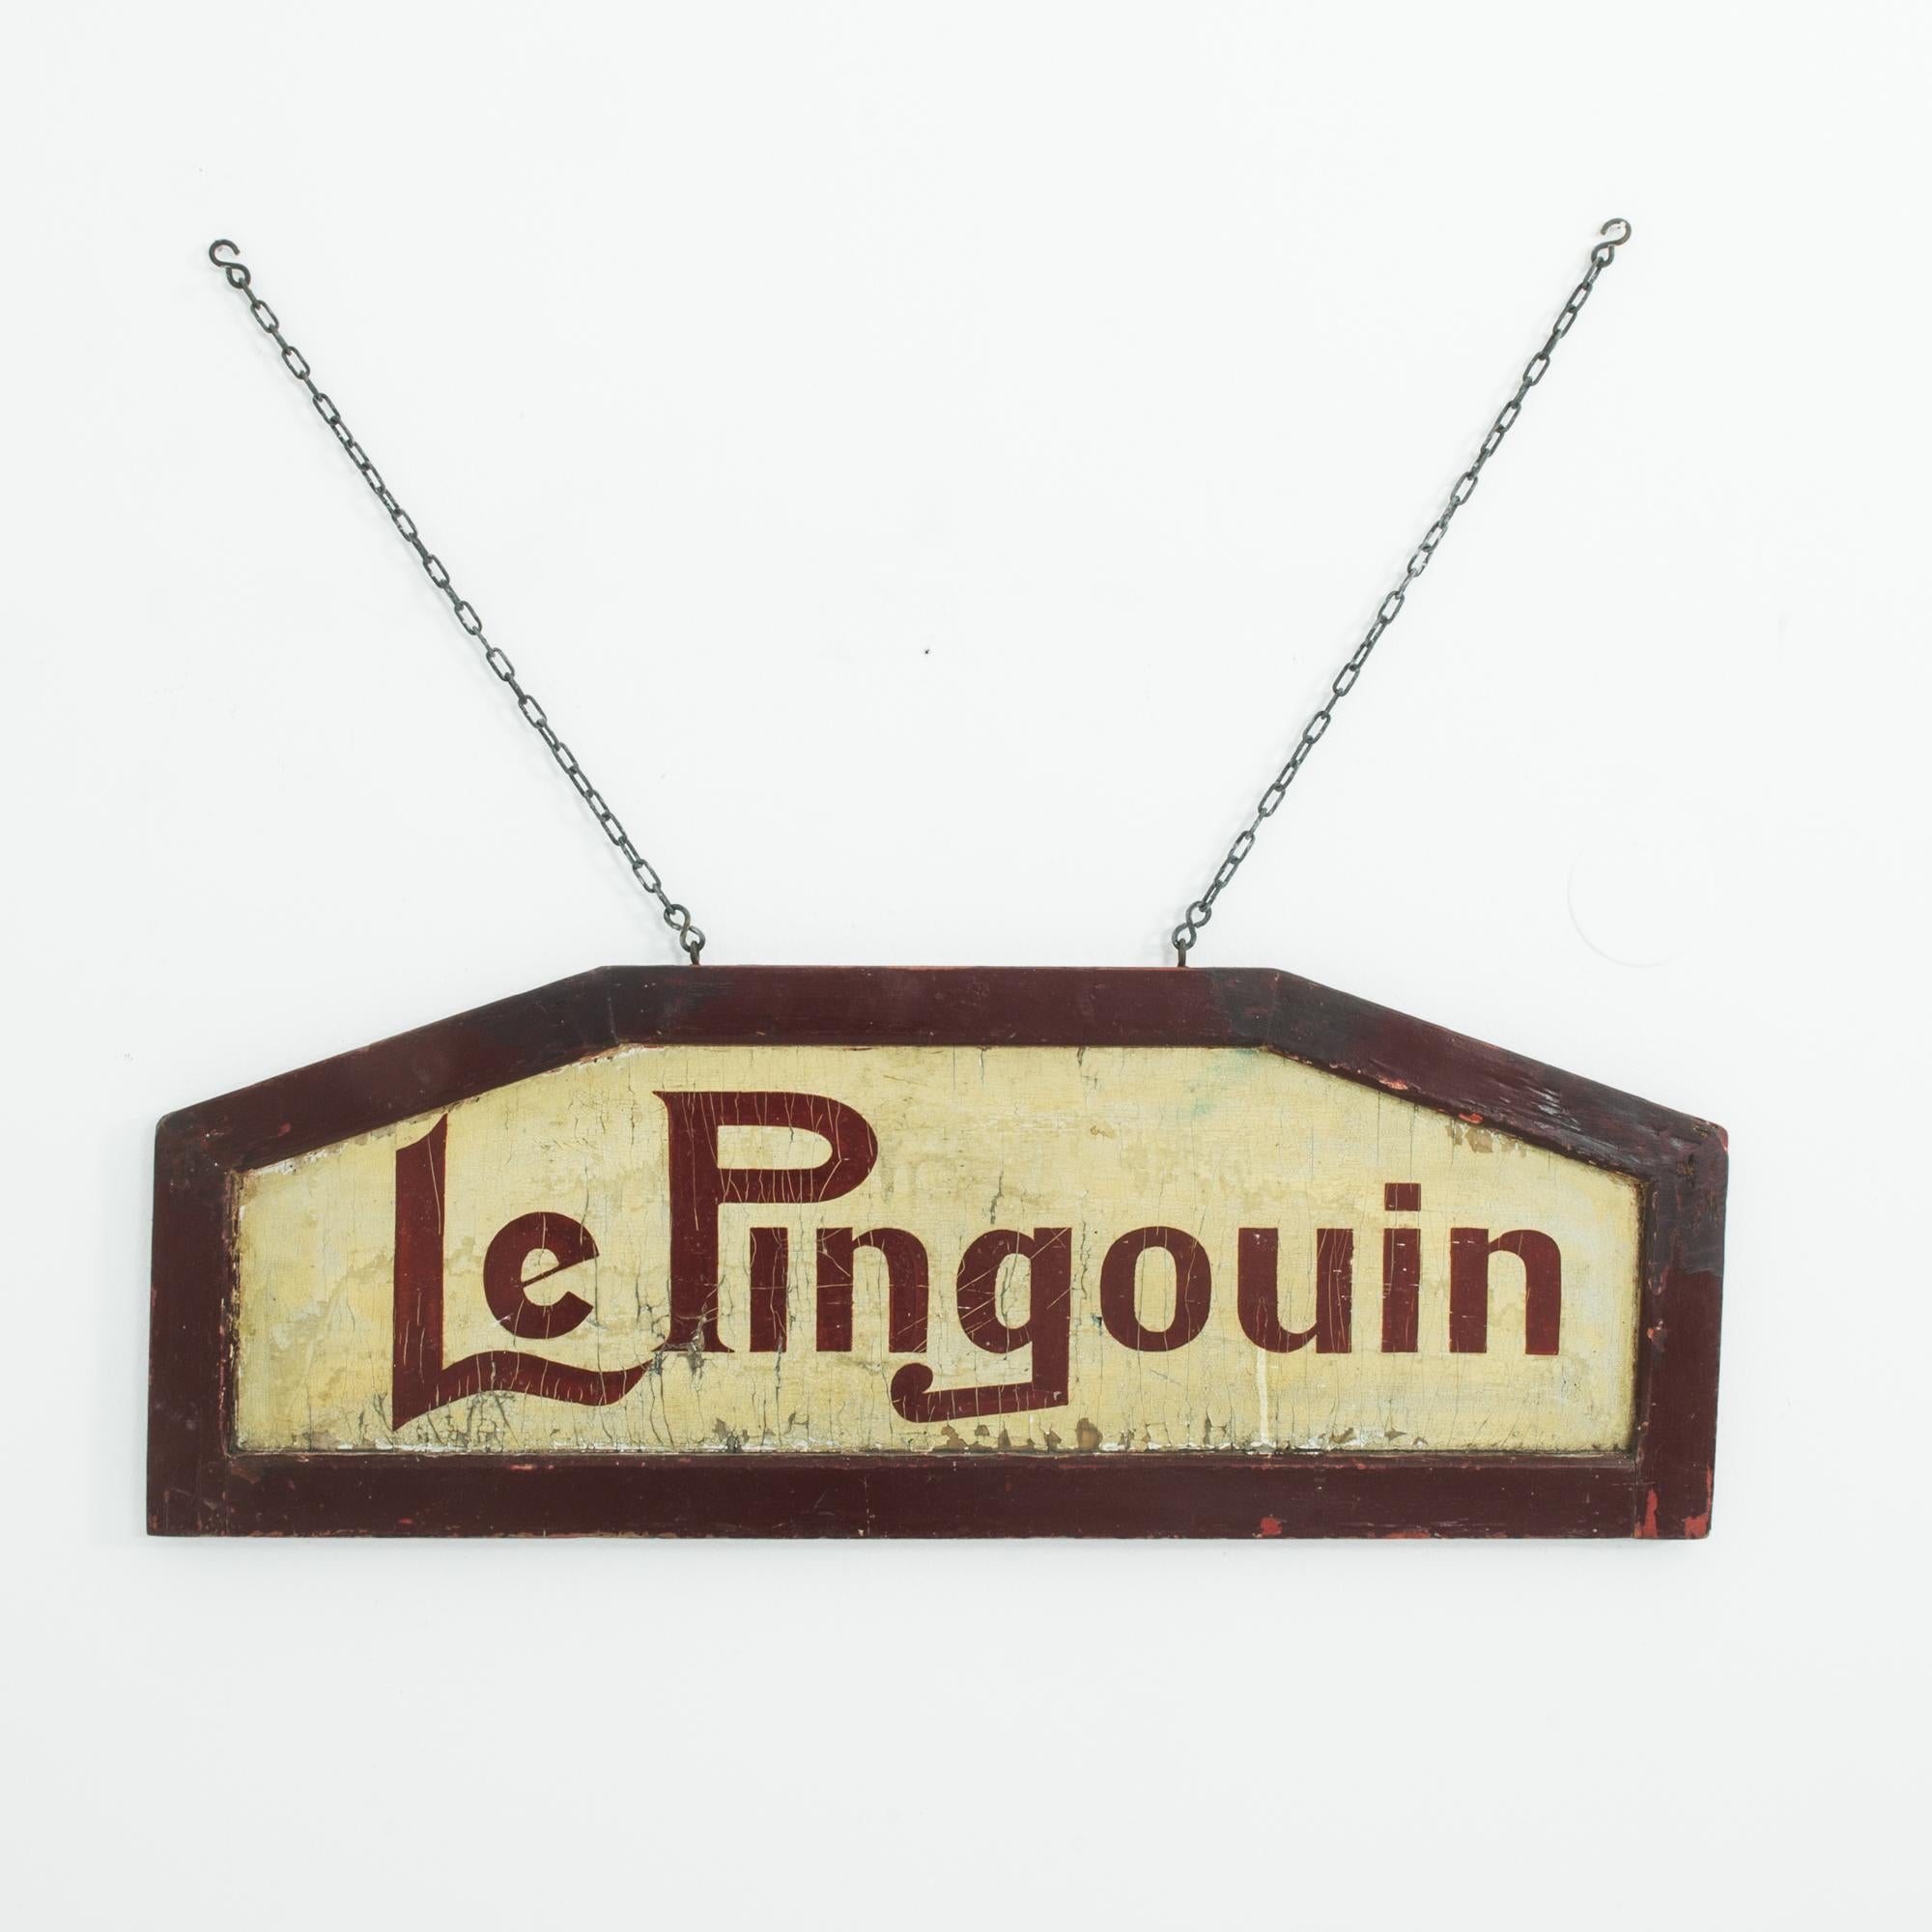 Reminding of summer, warm and sweet, ‘Le Pingouin’ a wooden shop sign from Belgium, circa 1950. Beautifully rendered in a unique calligraphy style, a piece of history capturing the lost art of hand-painted signage and the nostalgic style of 1950s